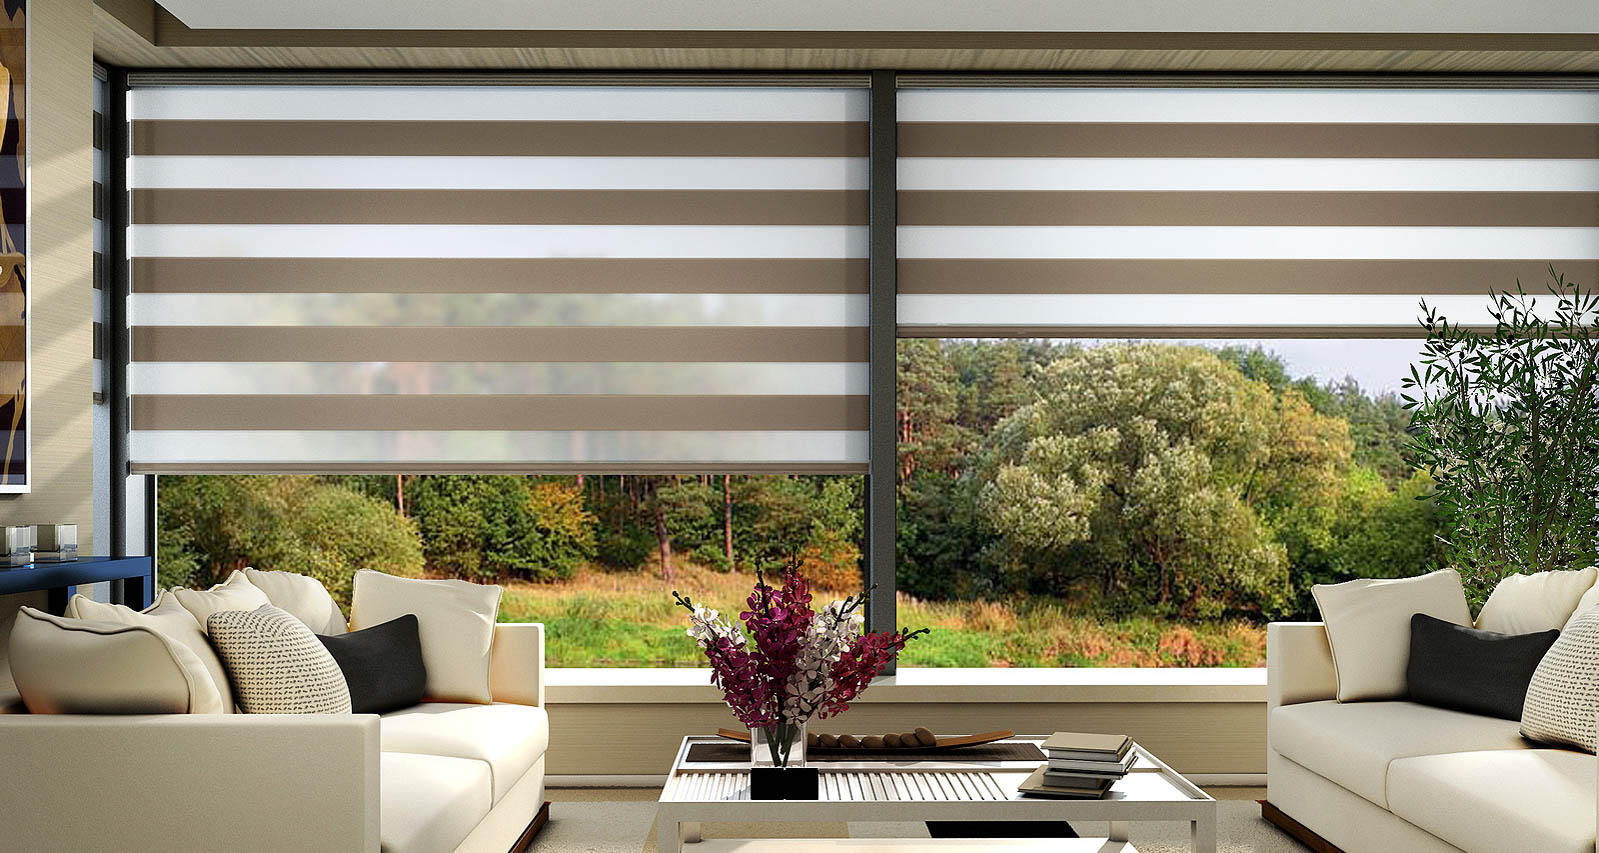 Bintronic automated sheer roller shades are among the many options in the market. Image: Bintronic.